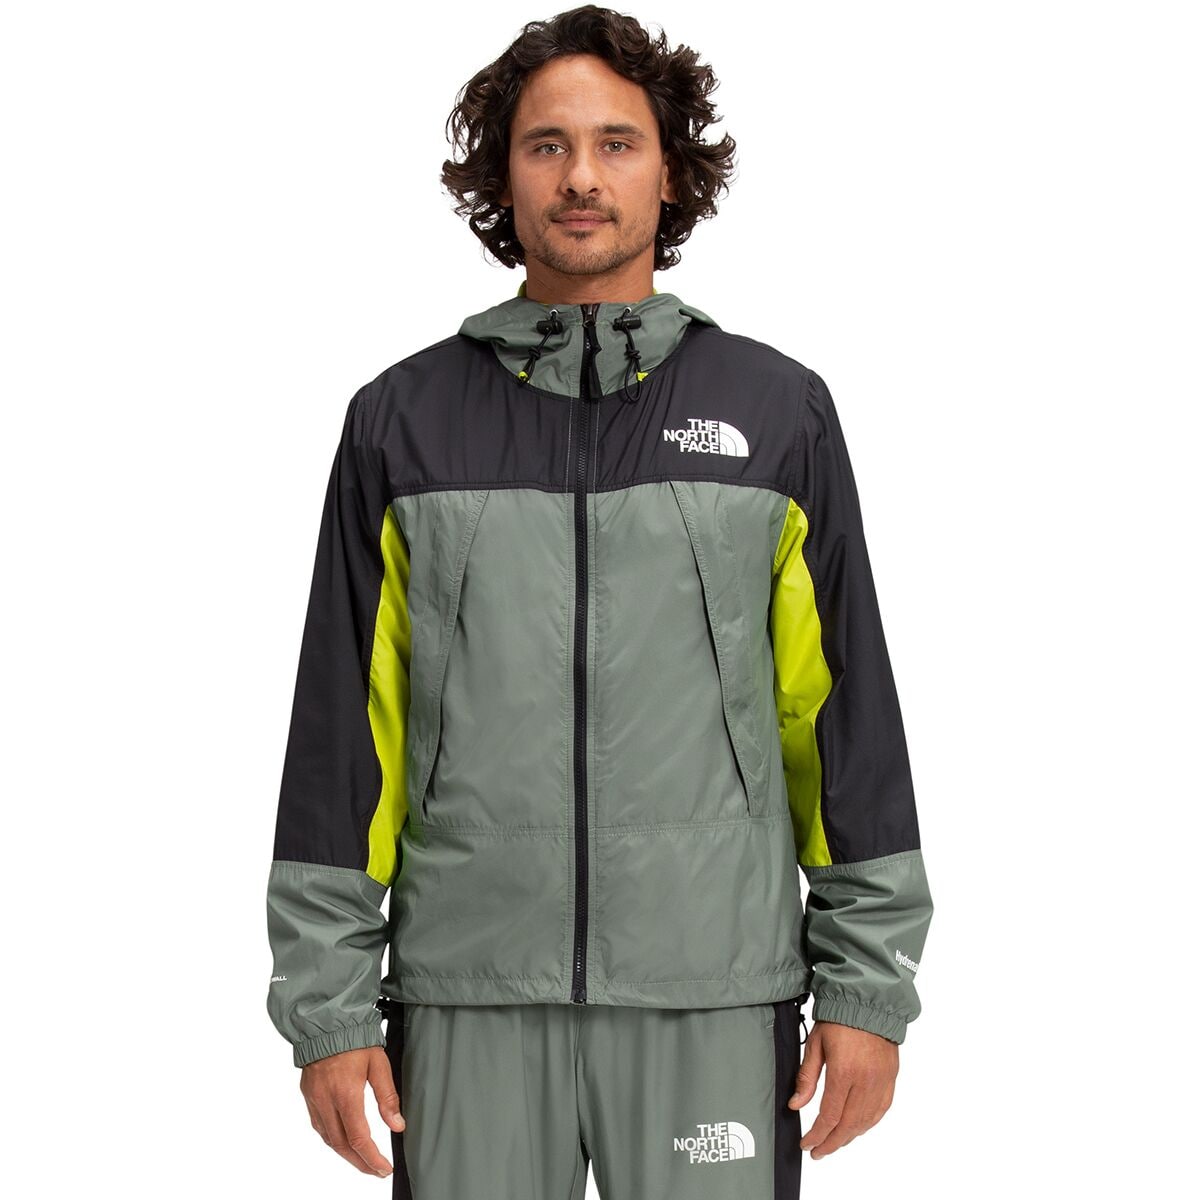 The North Face Hydrenaline Wind Jacket - Men's - Clothing